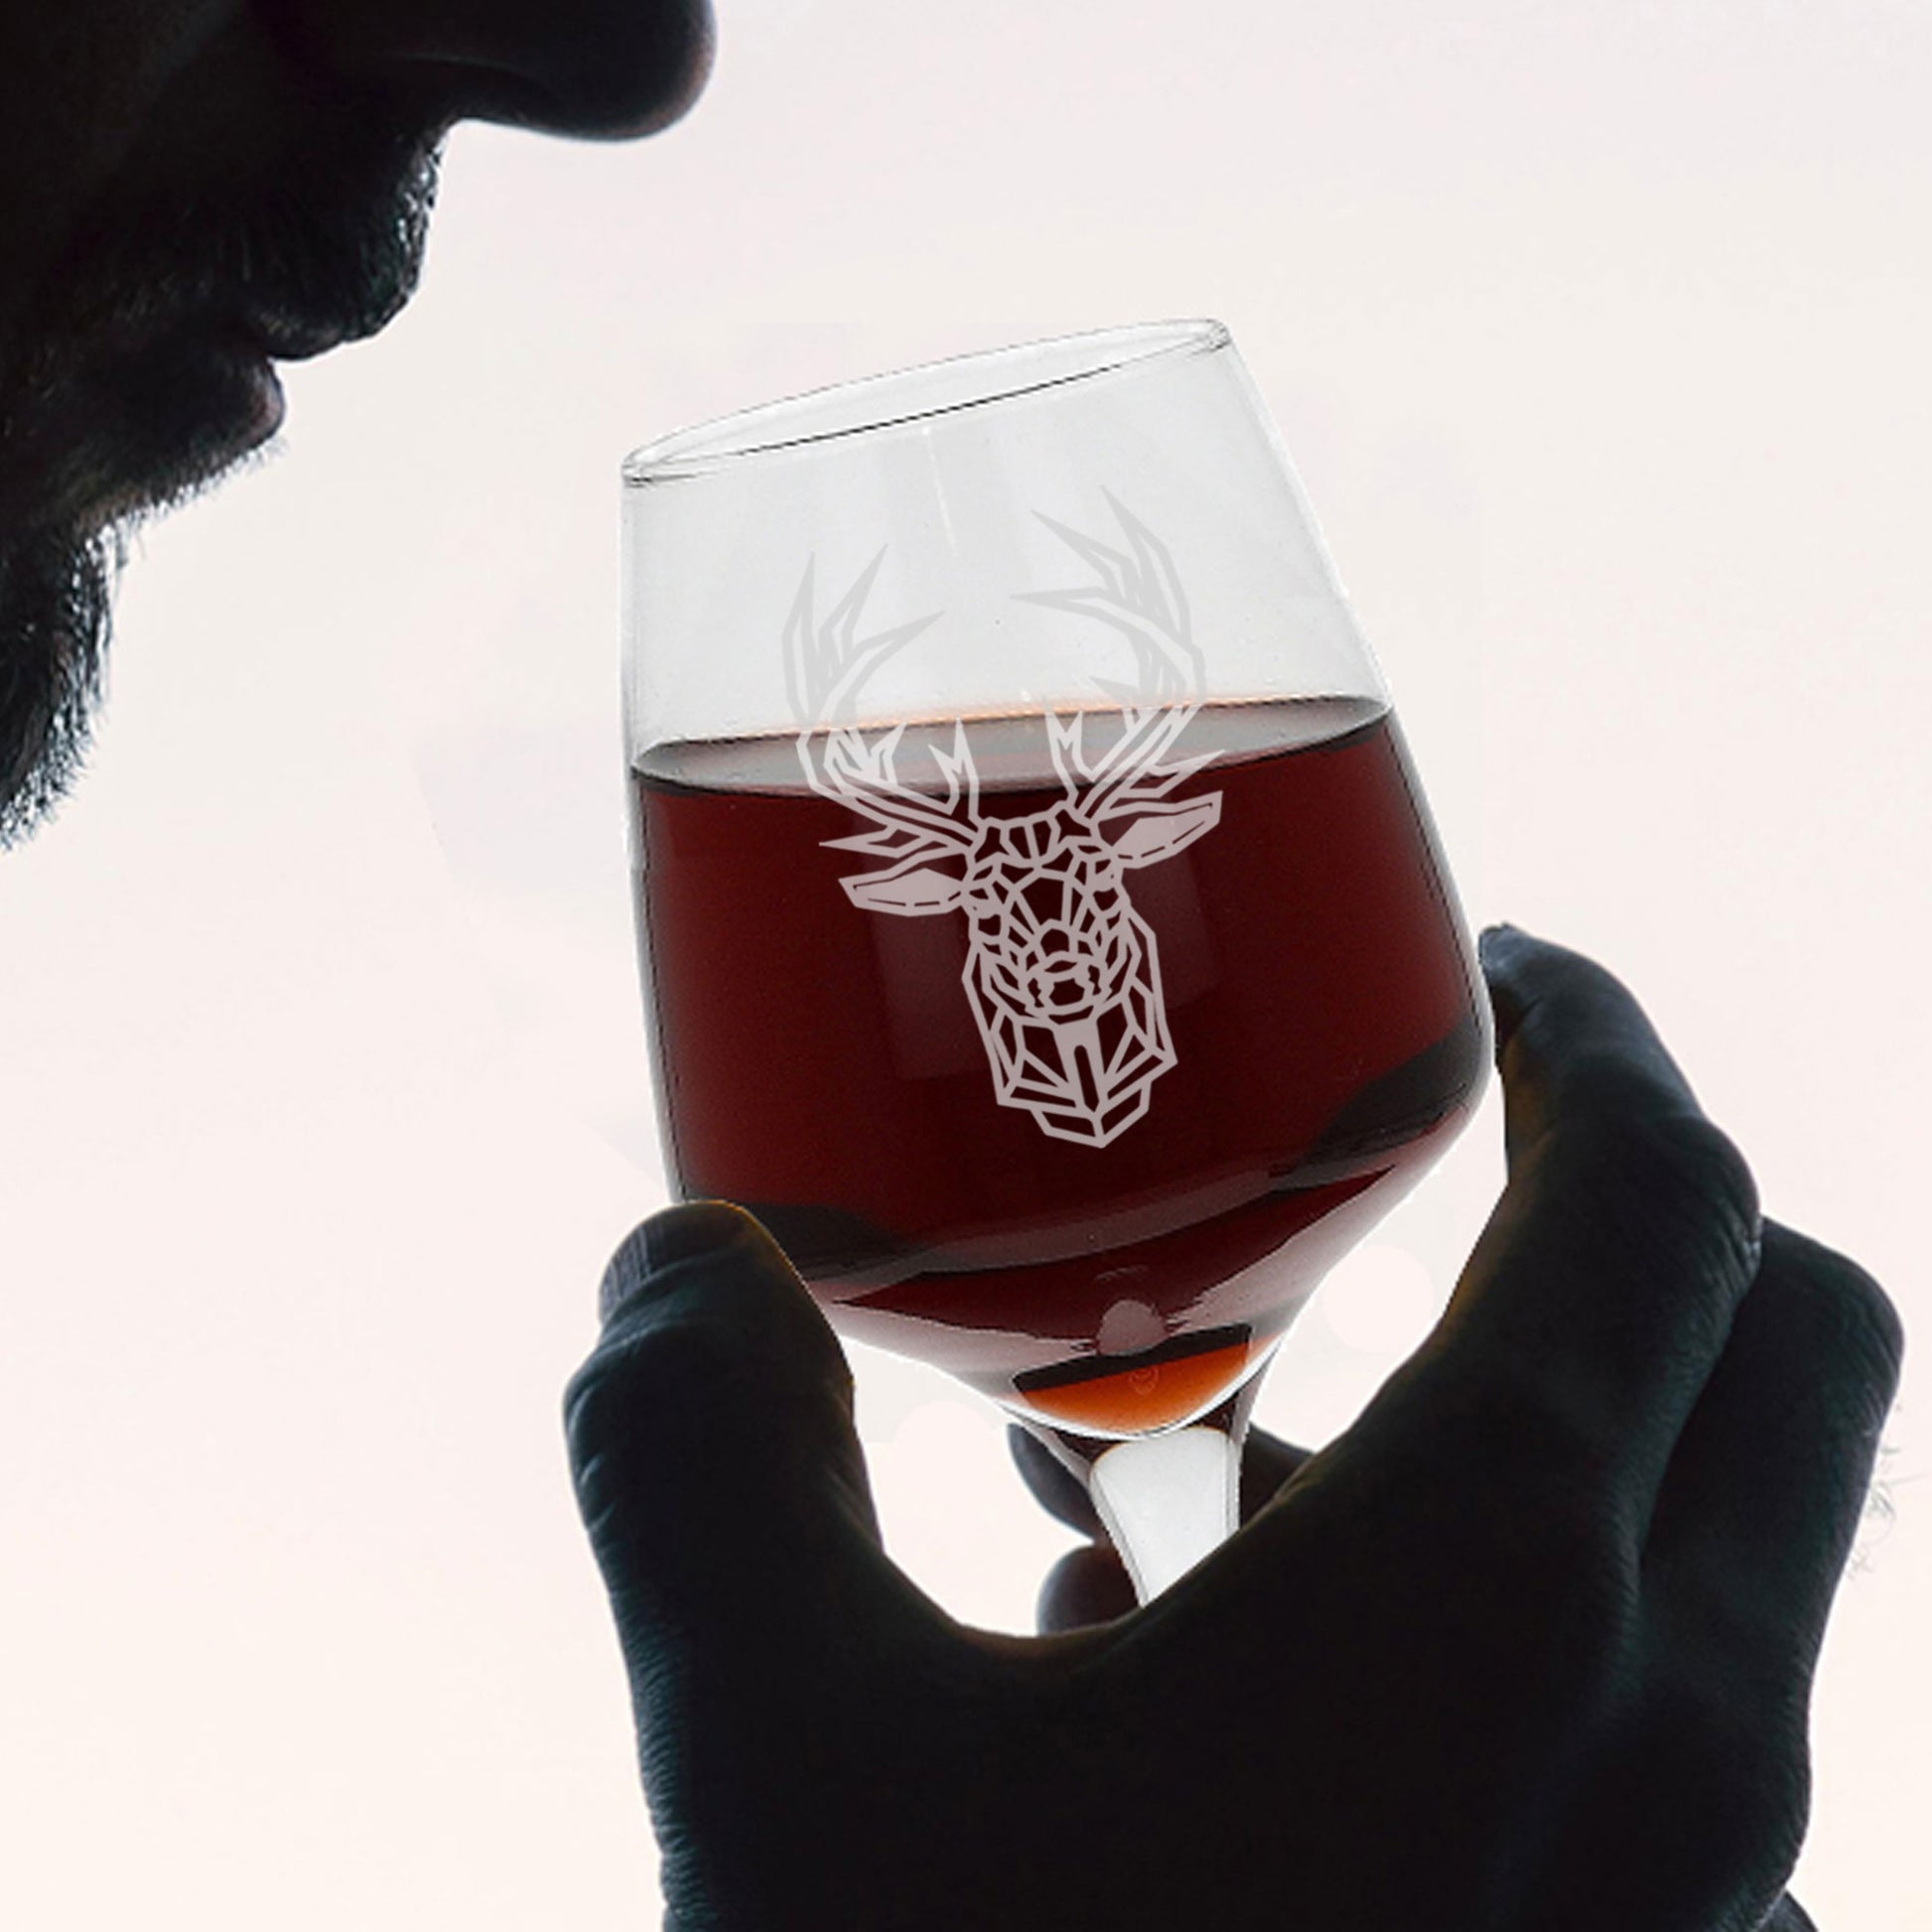 Stag Engraved Wine Glass  - Always Looking Good -   